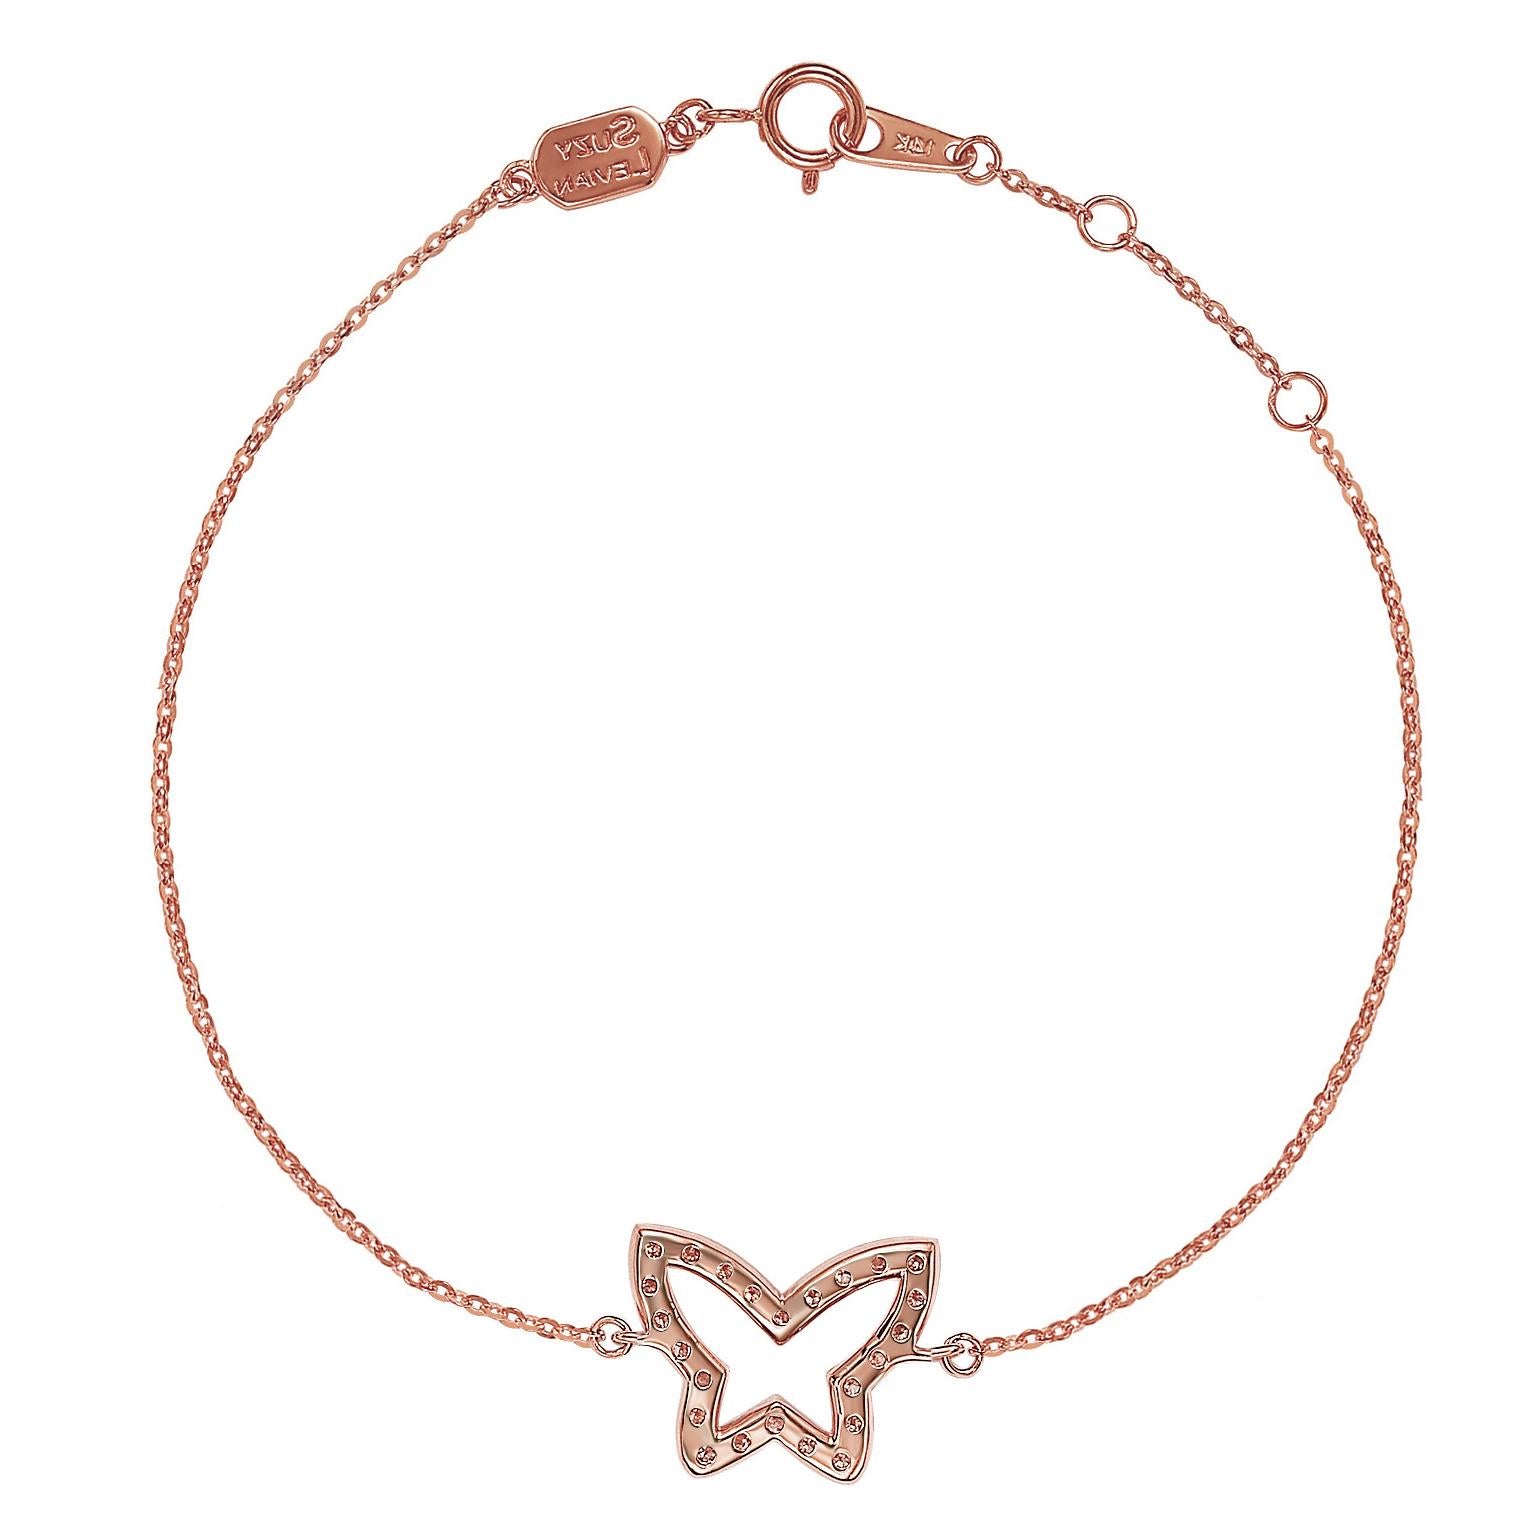 This elegant Suzy Levian butterfly solitaire bracelet features 24 diamonds, which are 1.4 mm size totals .30 cttw, all set in 14K rose gold setting. Each diamond butterfly is attached to a chain that is secured with a spring ring closure with a